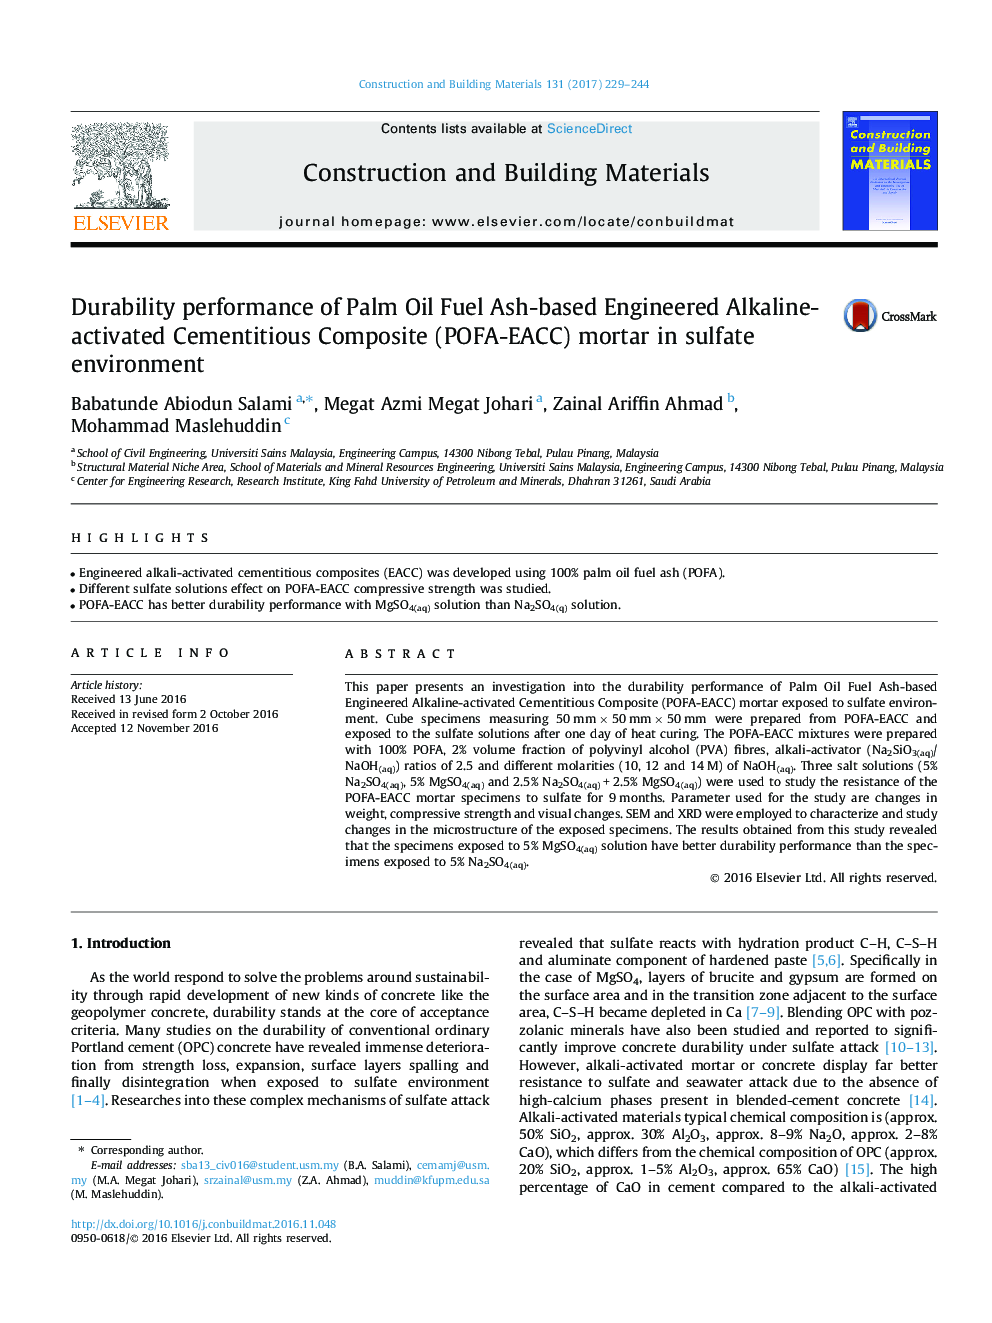 Durability performance of Palm Oil Fuel Ash-based Engineered Alkaline-activated Cementitious Composite (POFA-EACC) mortar in sulfate environment